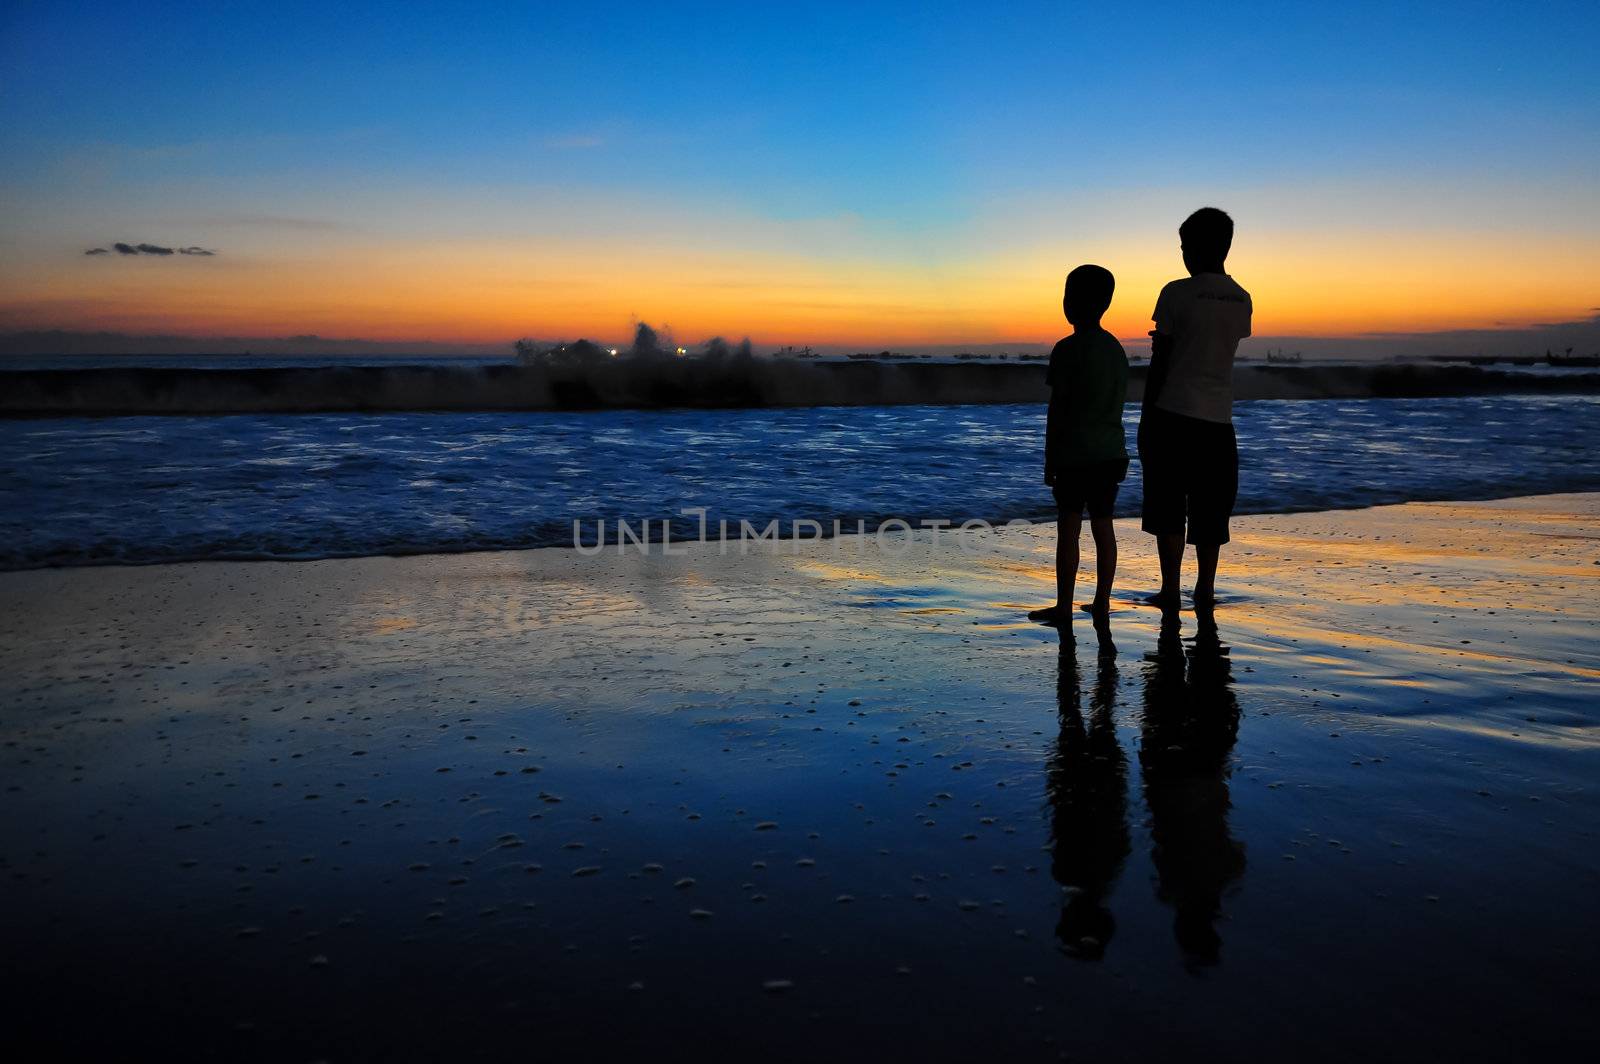 Silhouette of two young boys at ocean sunset, landscape view